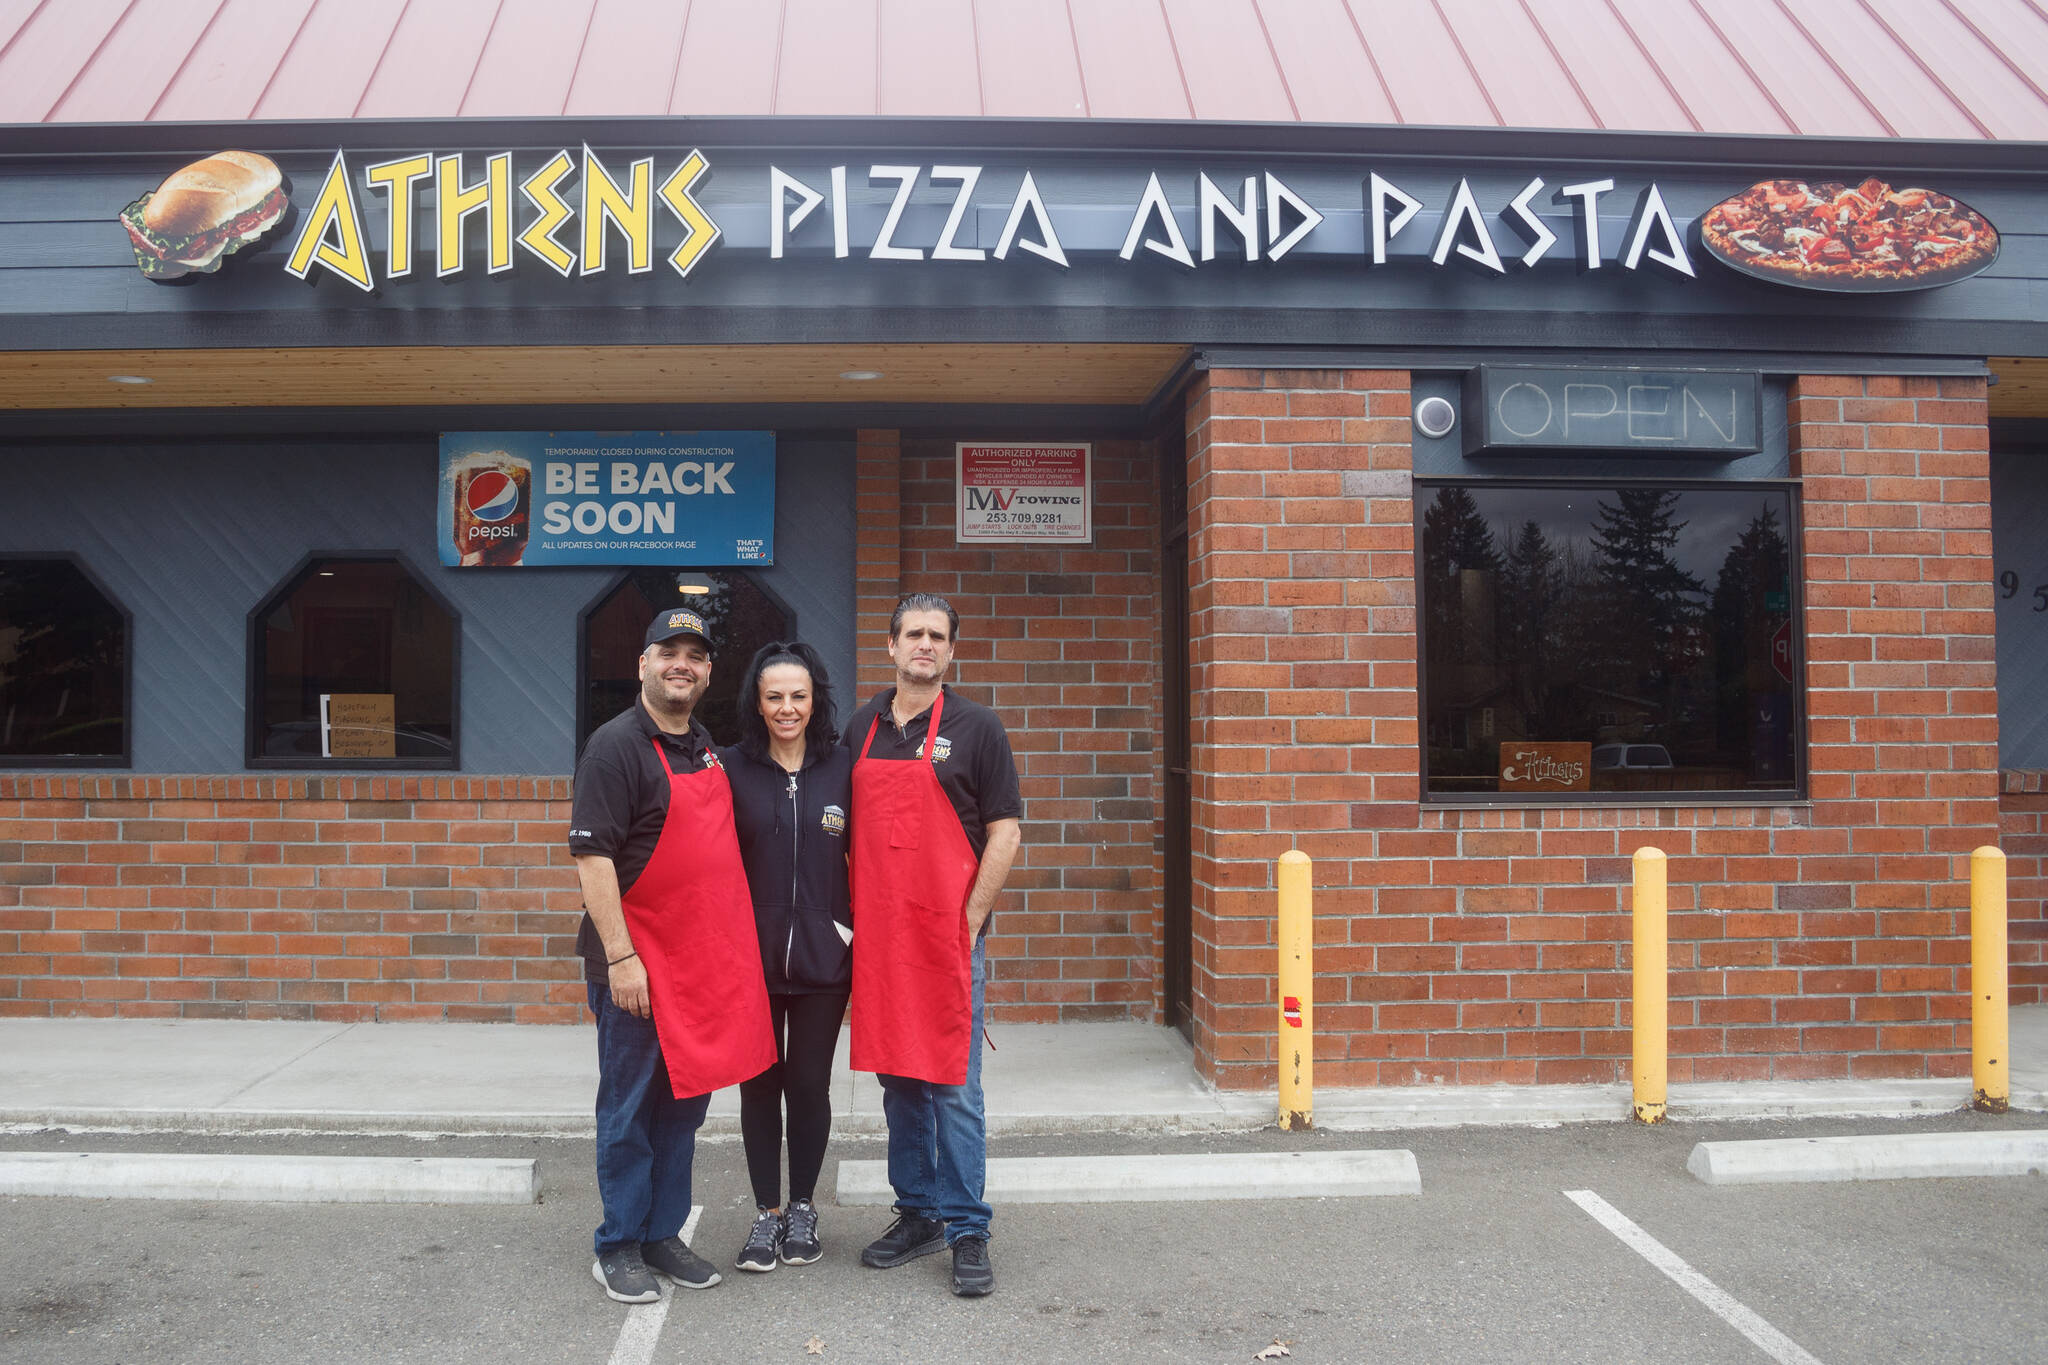 (Left to right) Bill, Nina and Tom Contoravdis, co-owners of Athens Pizza and Pasta, pose for a photo in front of their restaurant that is set to re-open for take-out on Friday, April 1. Photo by Henry Stewart-Wood/Sound Publishing